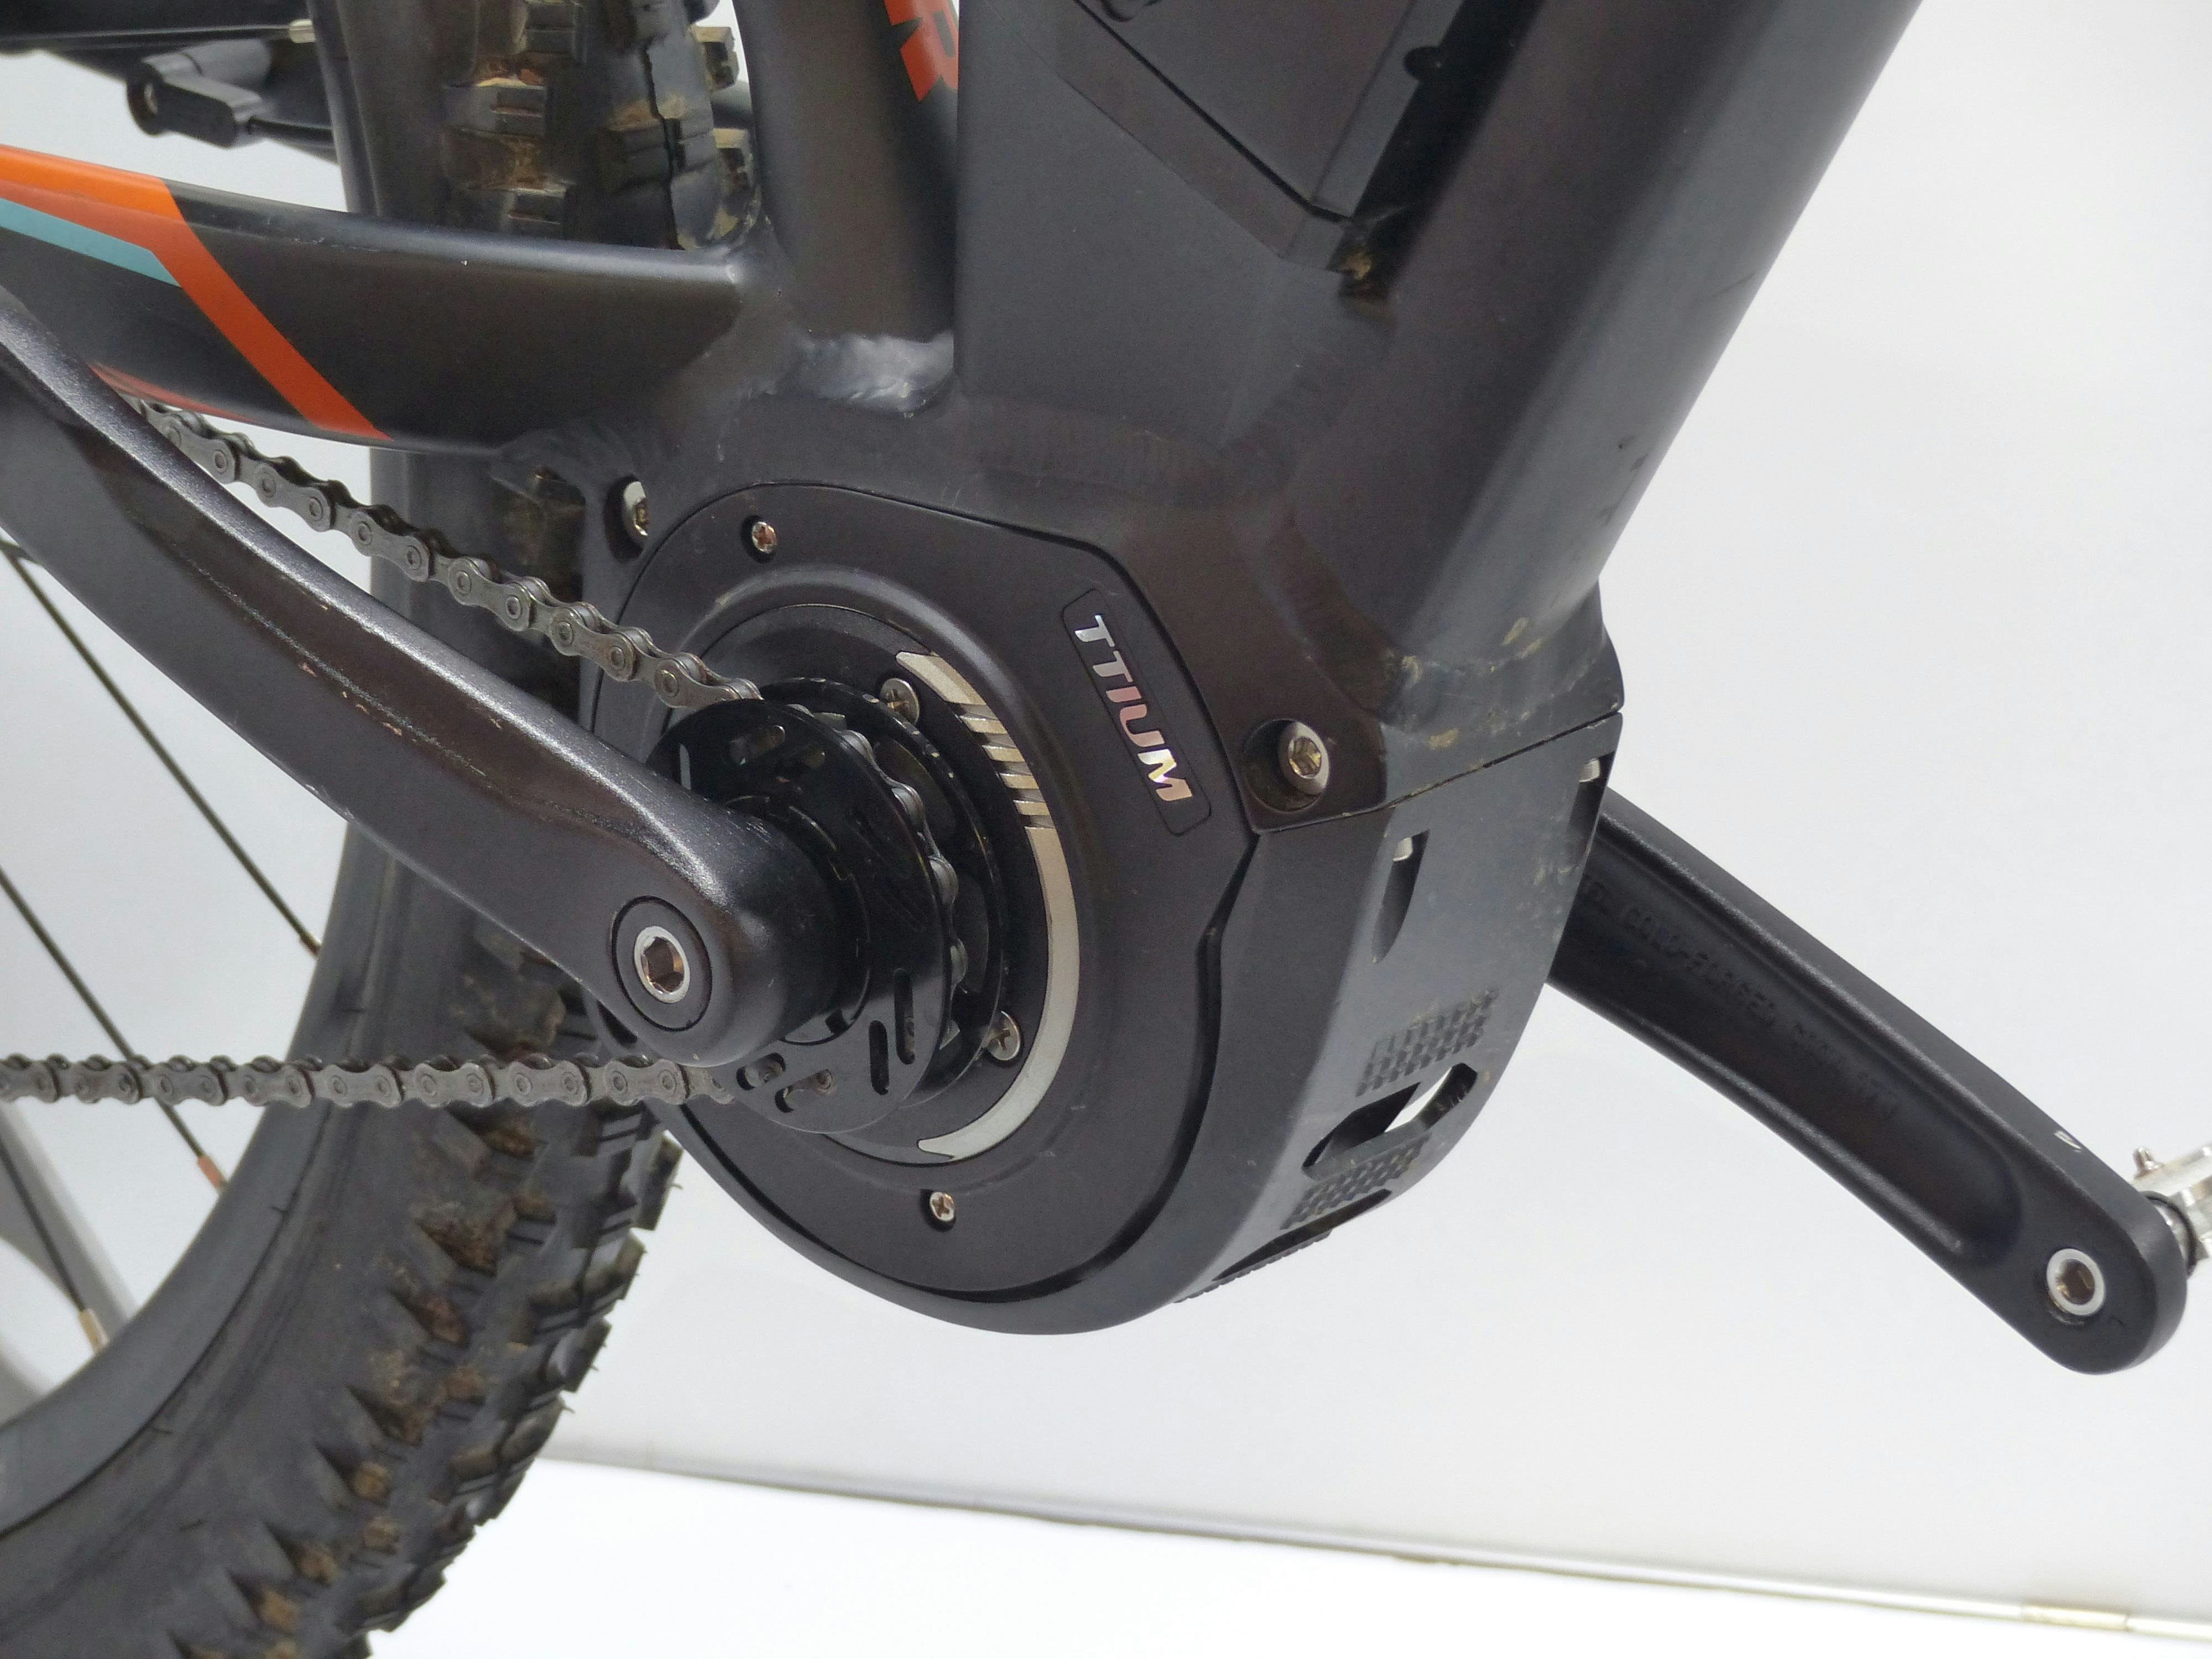 Ttium’s Powerful PX motor has been designed for the MTB. – Photo Bike Europe 